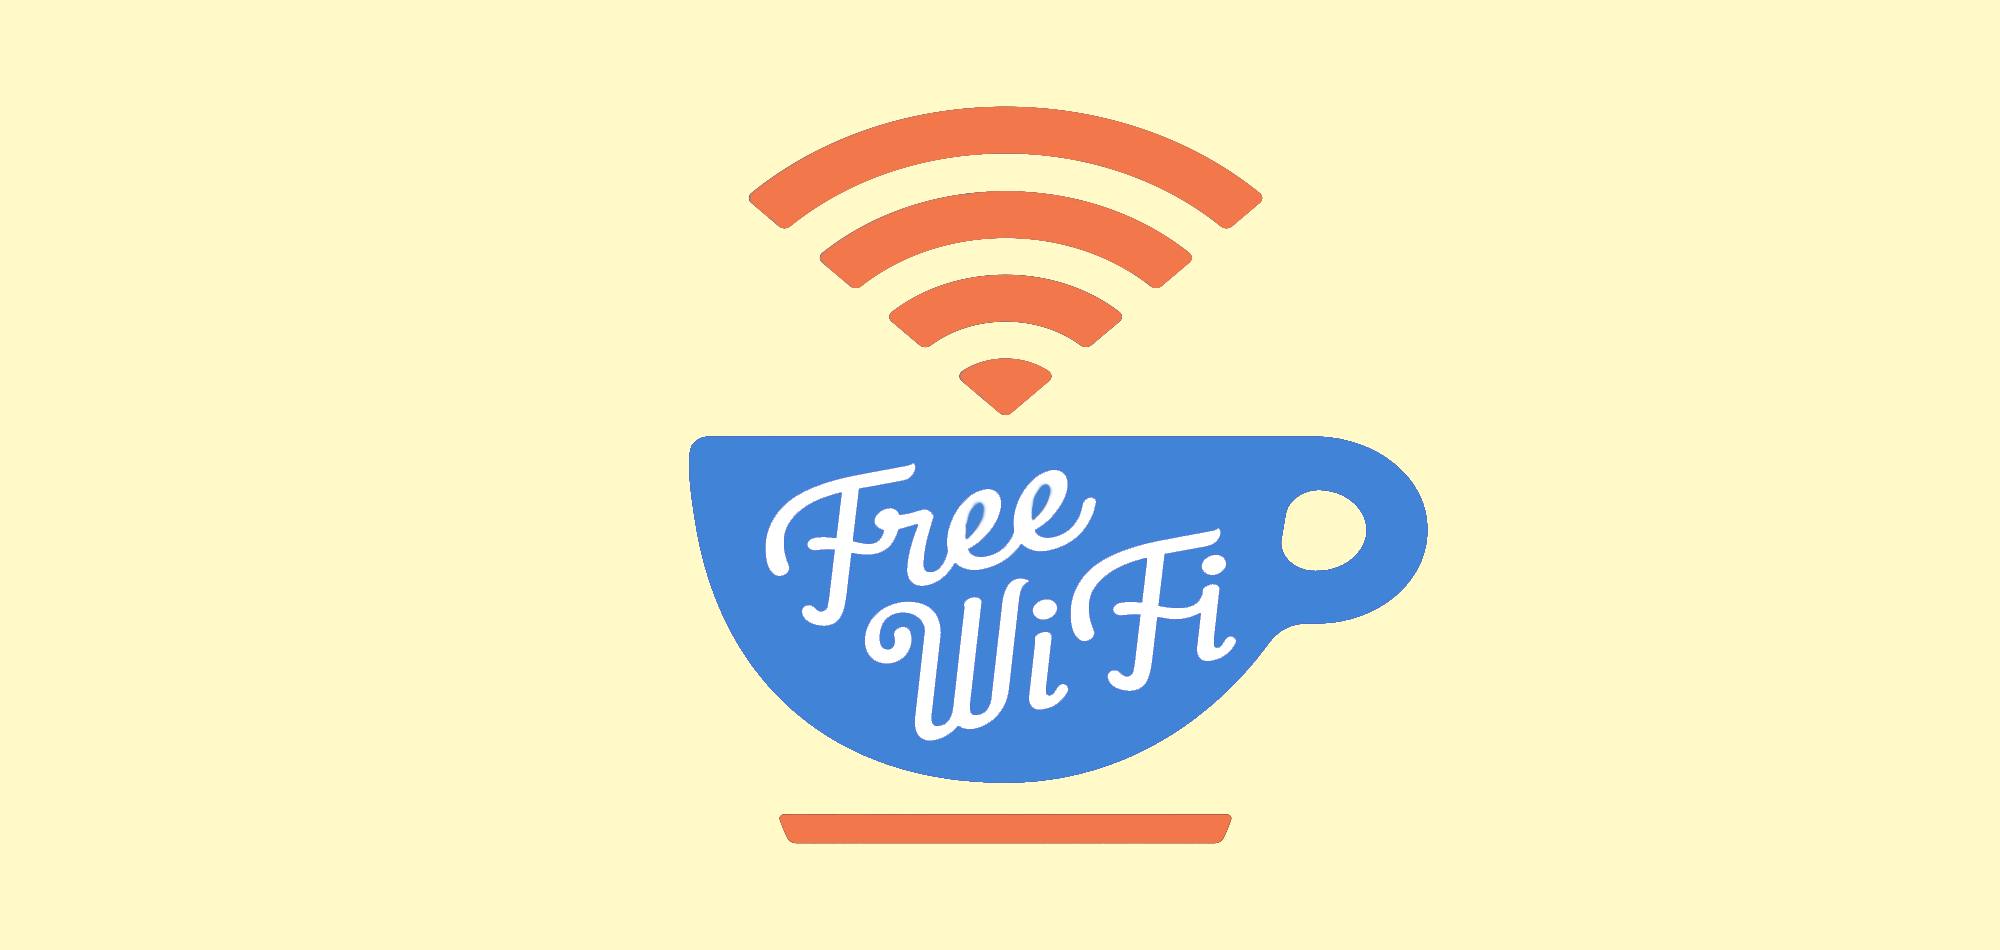 coffee mug with free wifi written on side of cup showing guest wifi